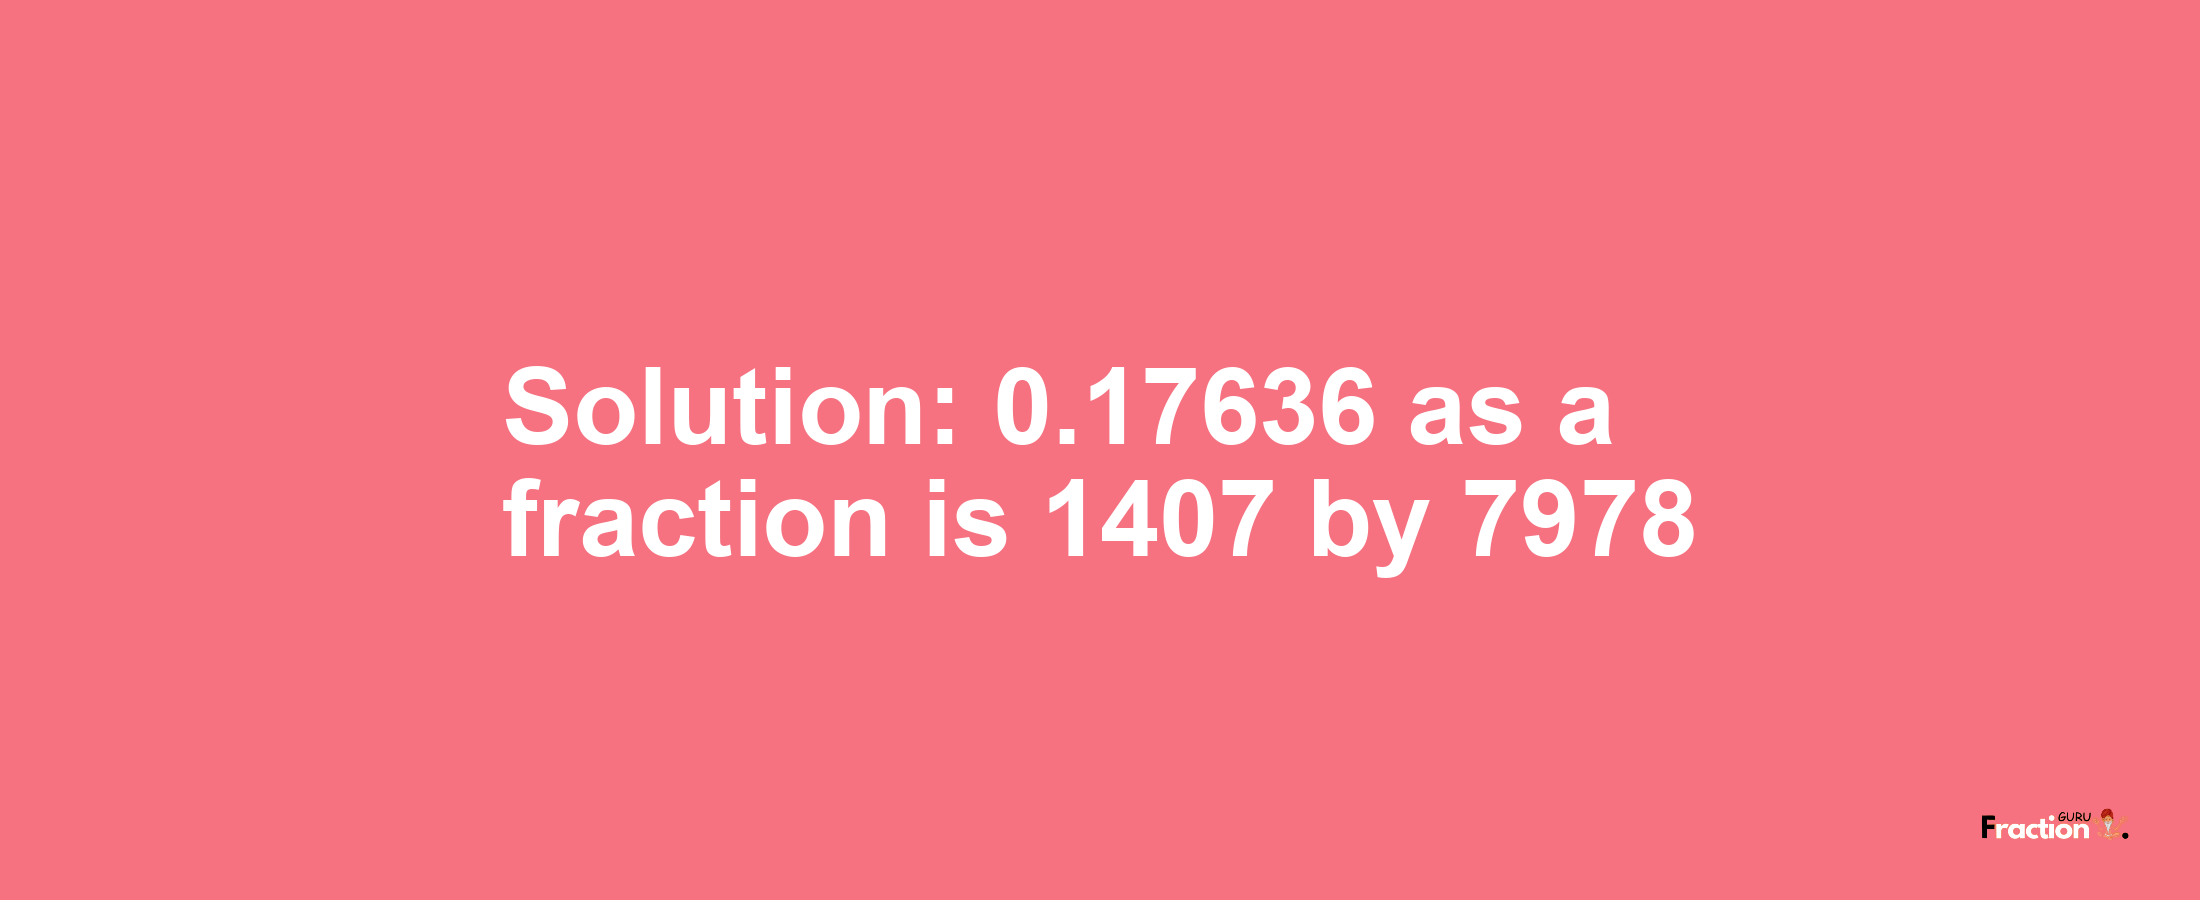 Solution:0.17636 as a fraction is 1407/7978